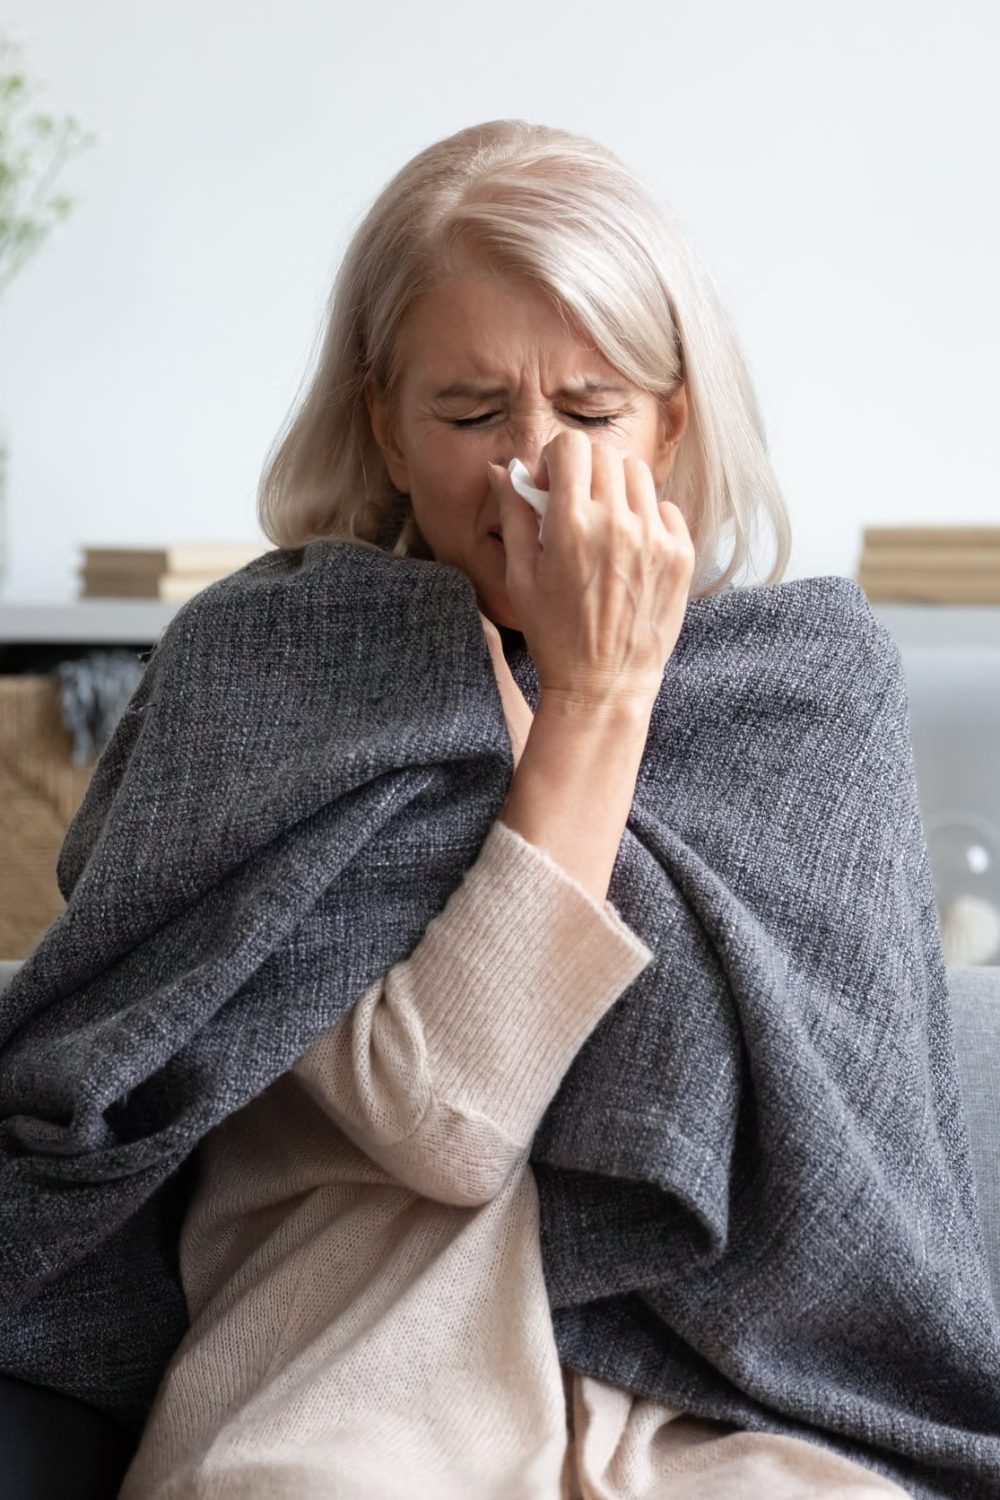 Middle-aged 50s sick frozen woman seated on sofa in living room covered with warm plaid sneezing holding paper napkin blow out runny nose feels unhealthy, seasonal cold, weakened immune system concept